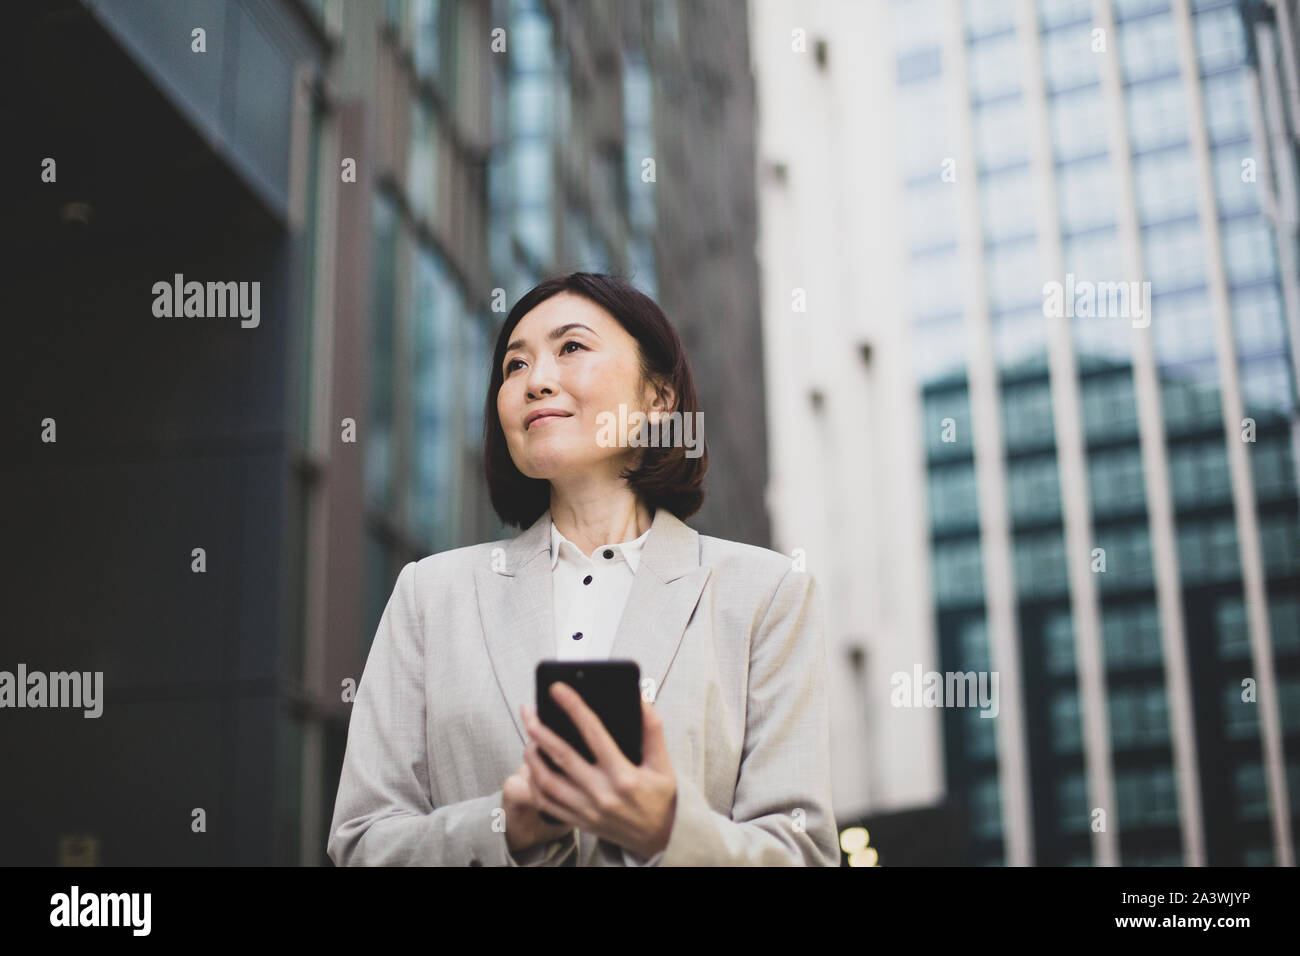 Businesswoman walking in city using smartphone Banque D'Images